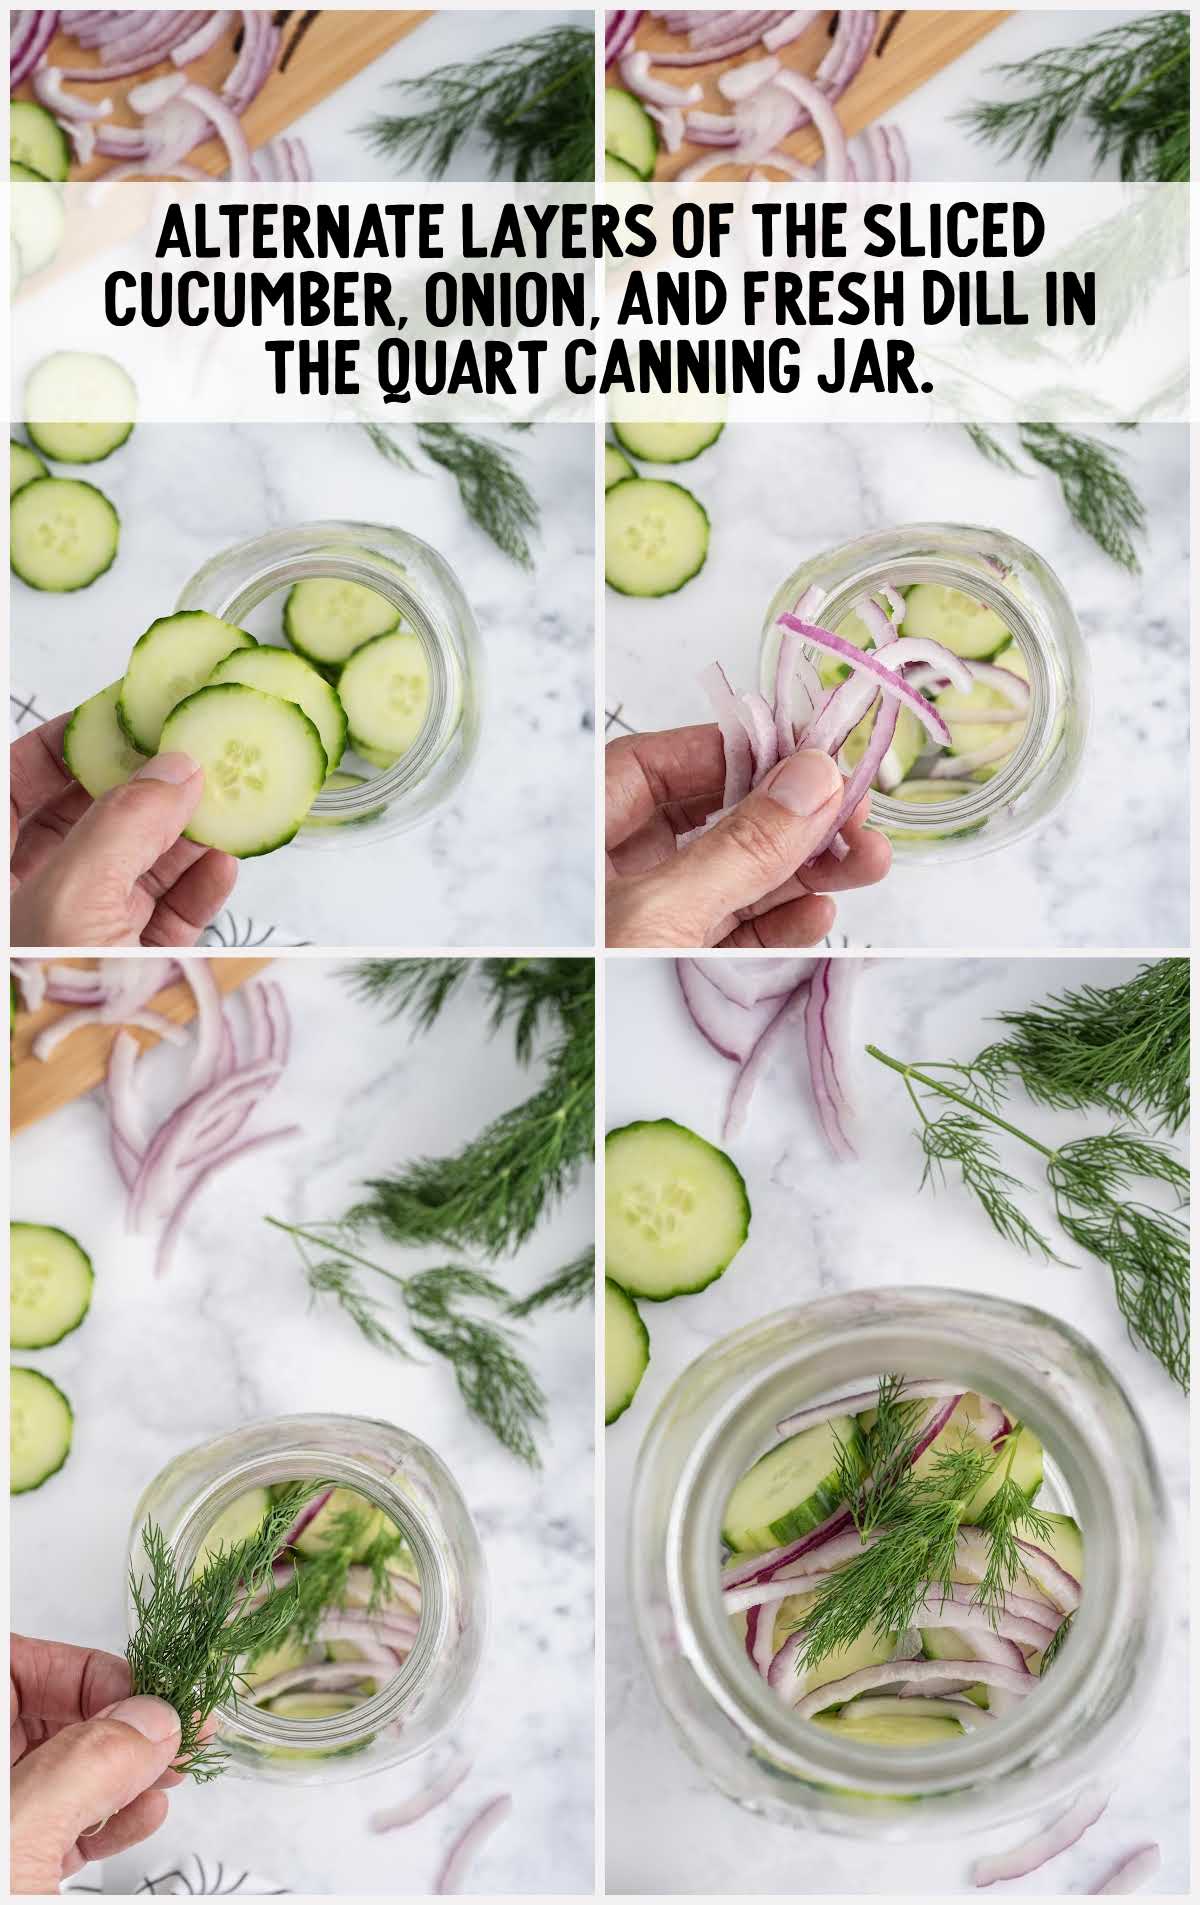 sliced cucumber, onion, and dill layer in a jar